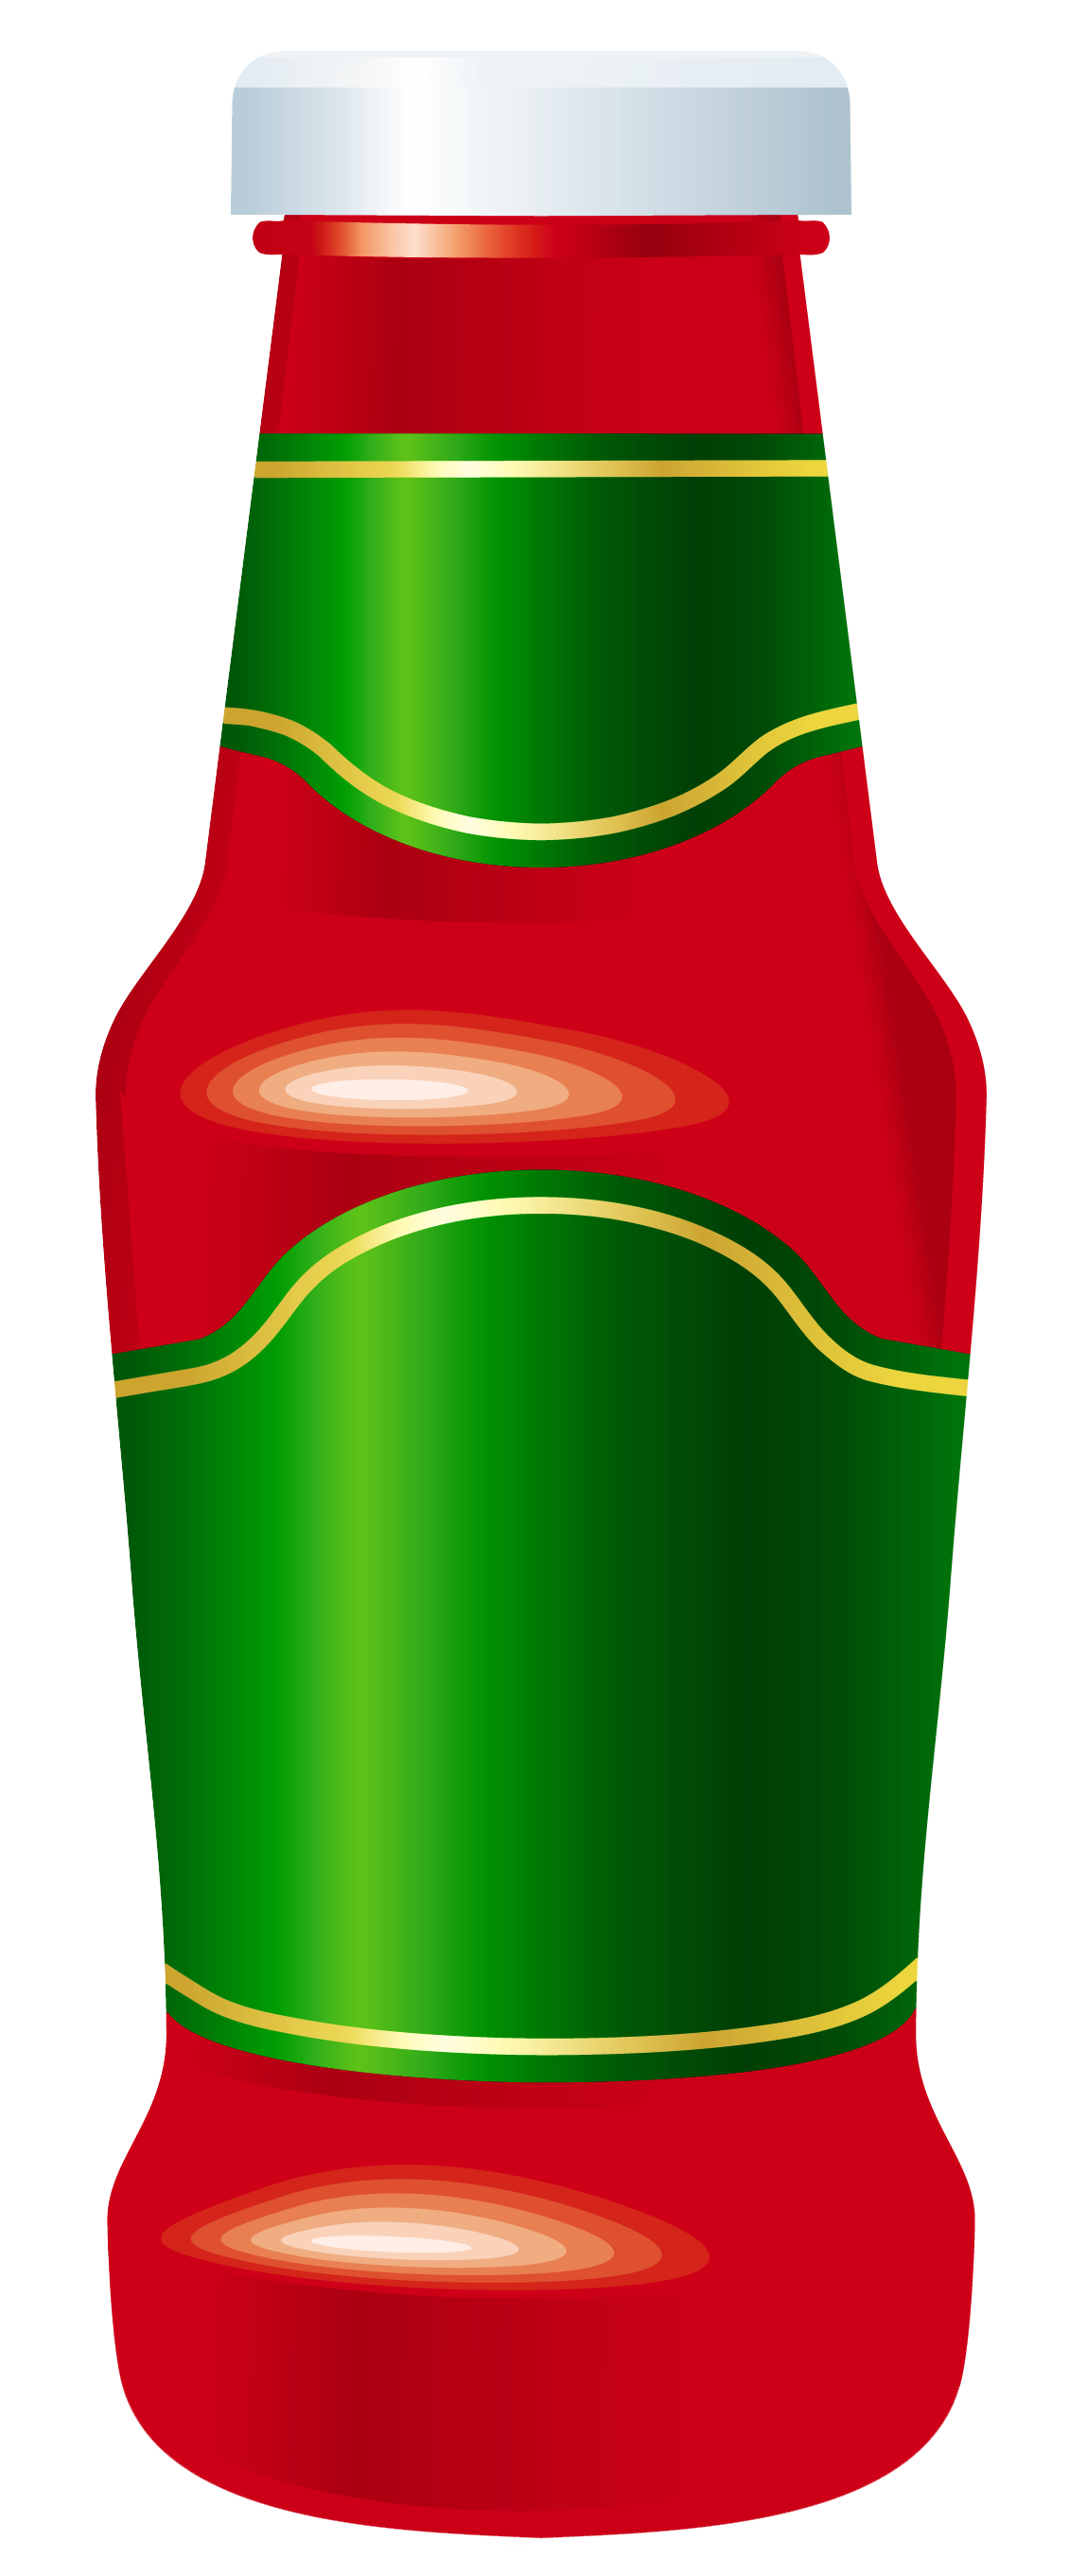 Ketchup Bottle Png Clipart Image Gallery Yopriceville High Quality Images And Transparent Png Free Clipart